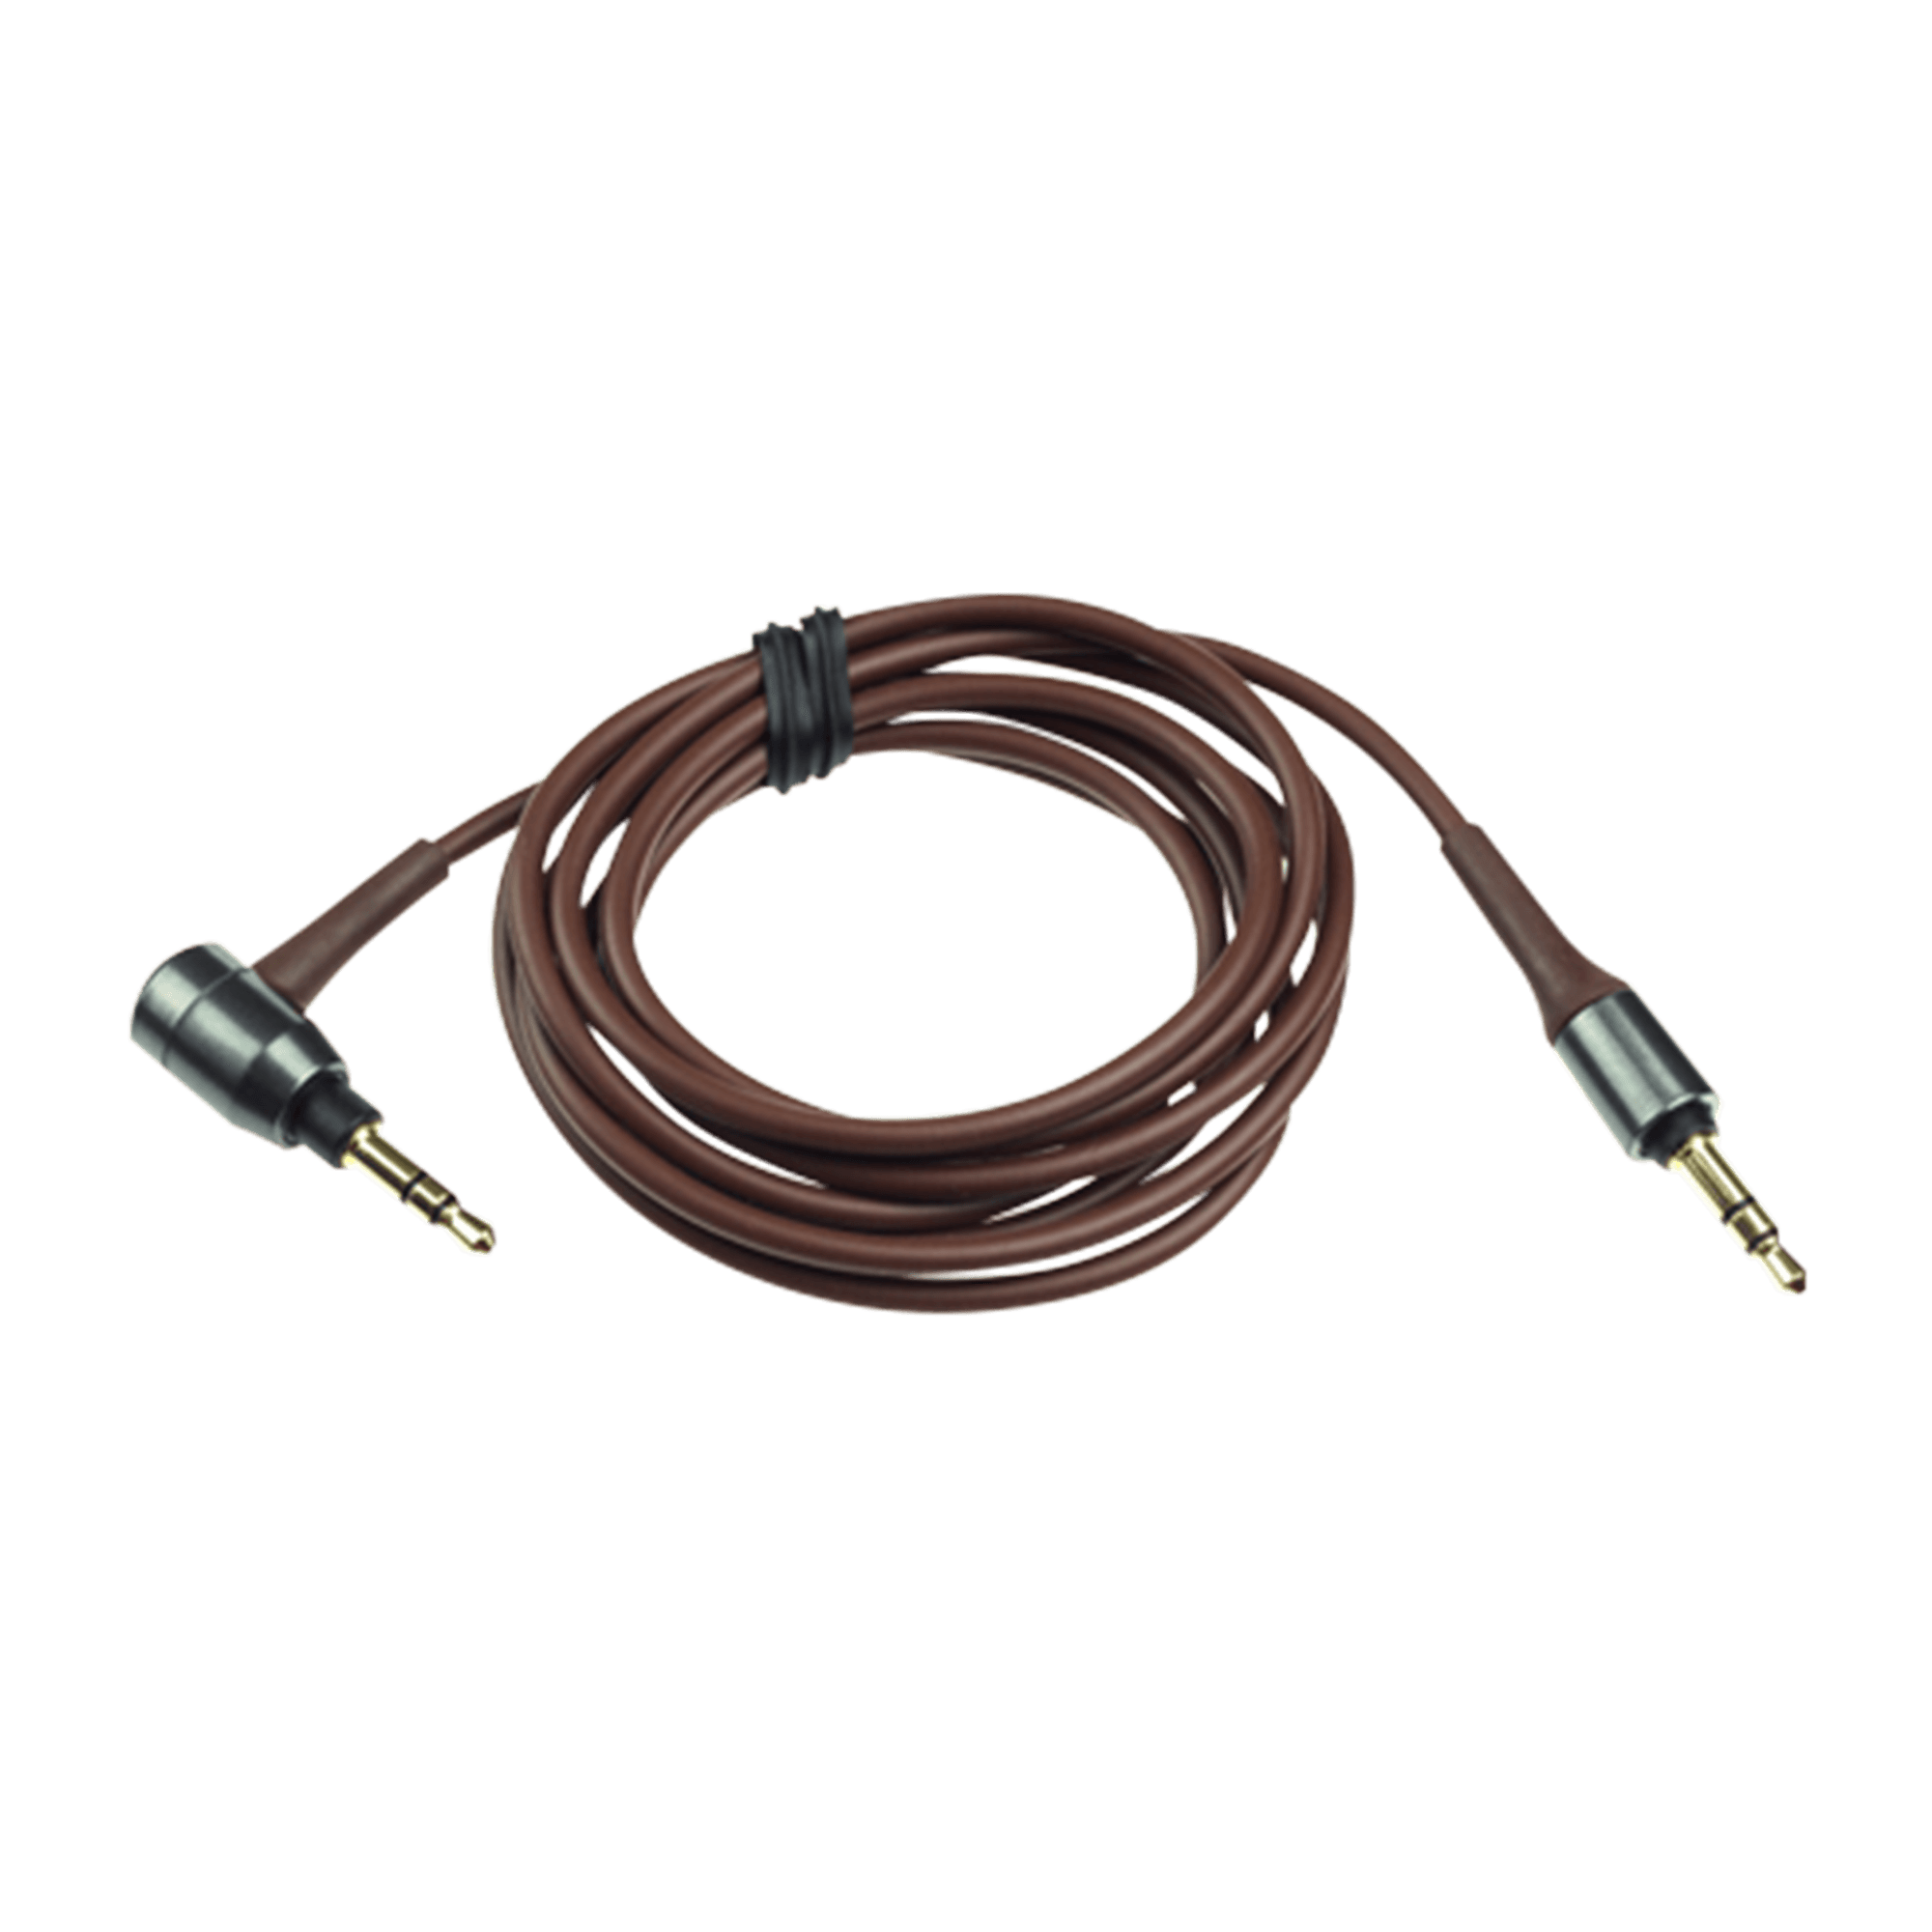 ATH-MSR7 Audio Cable